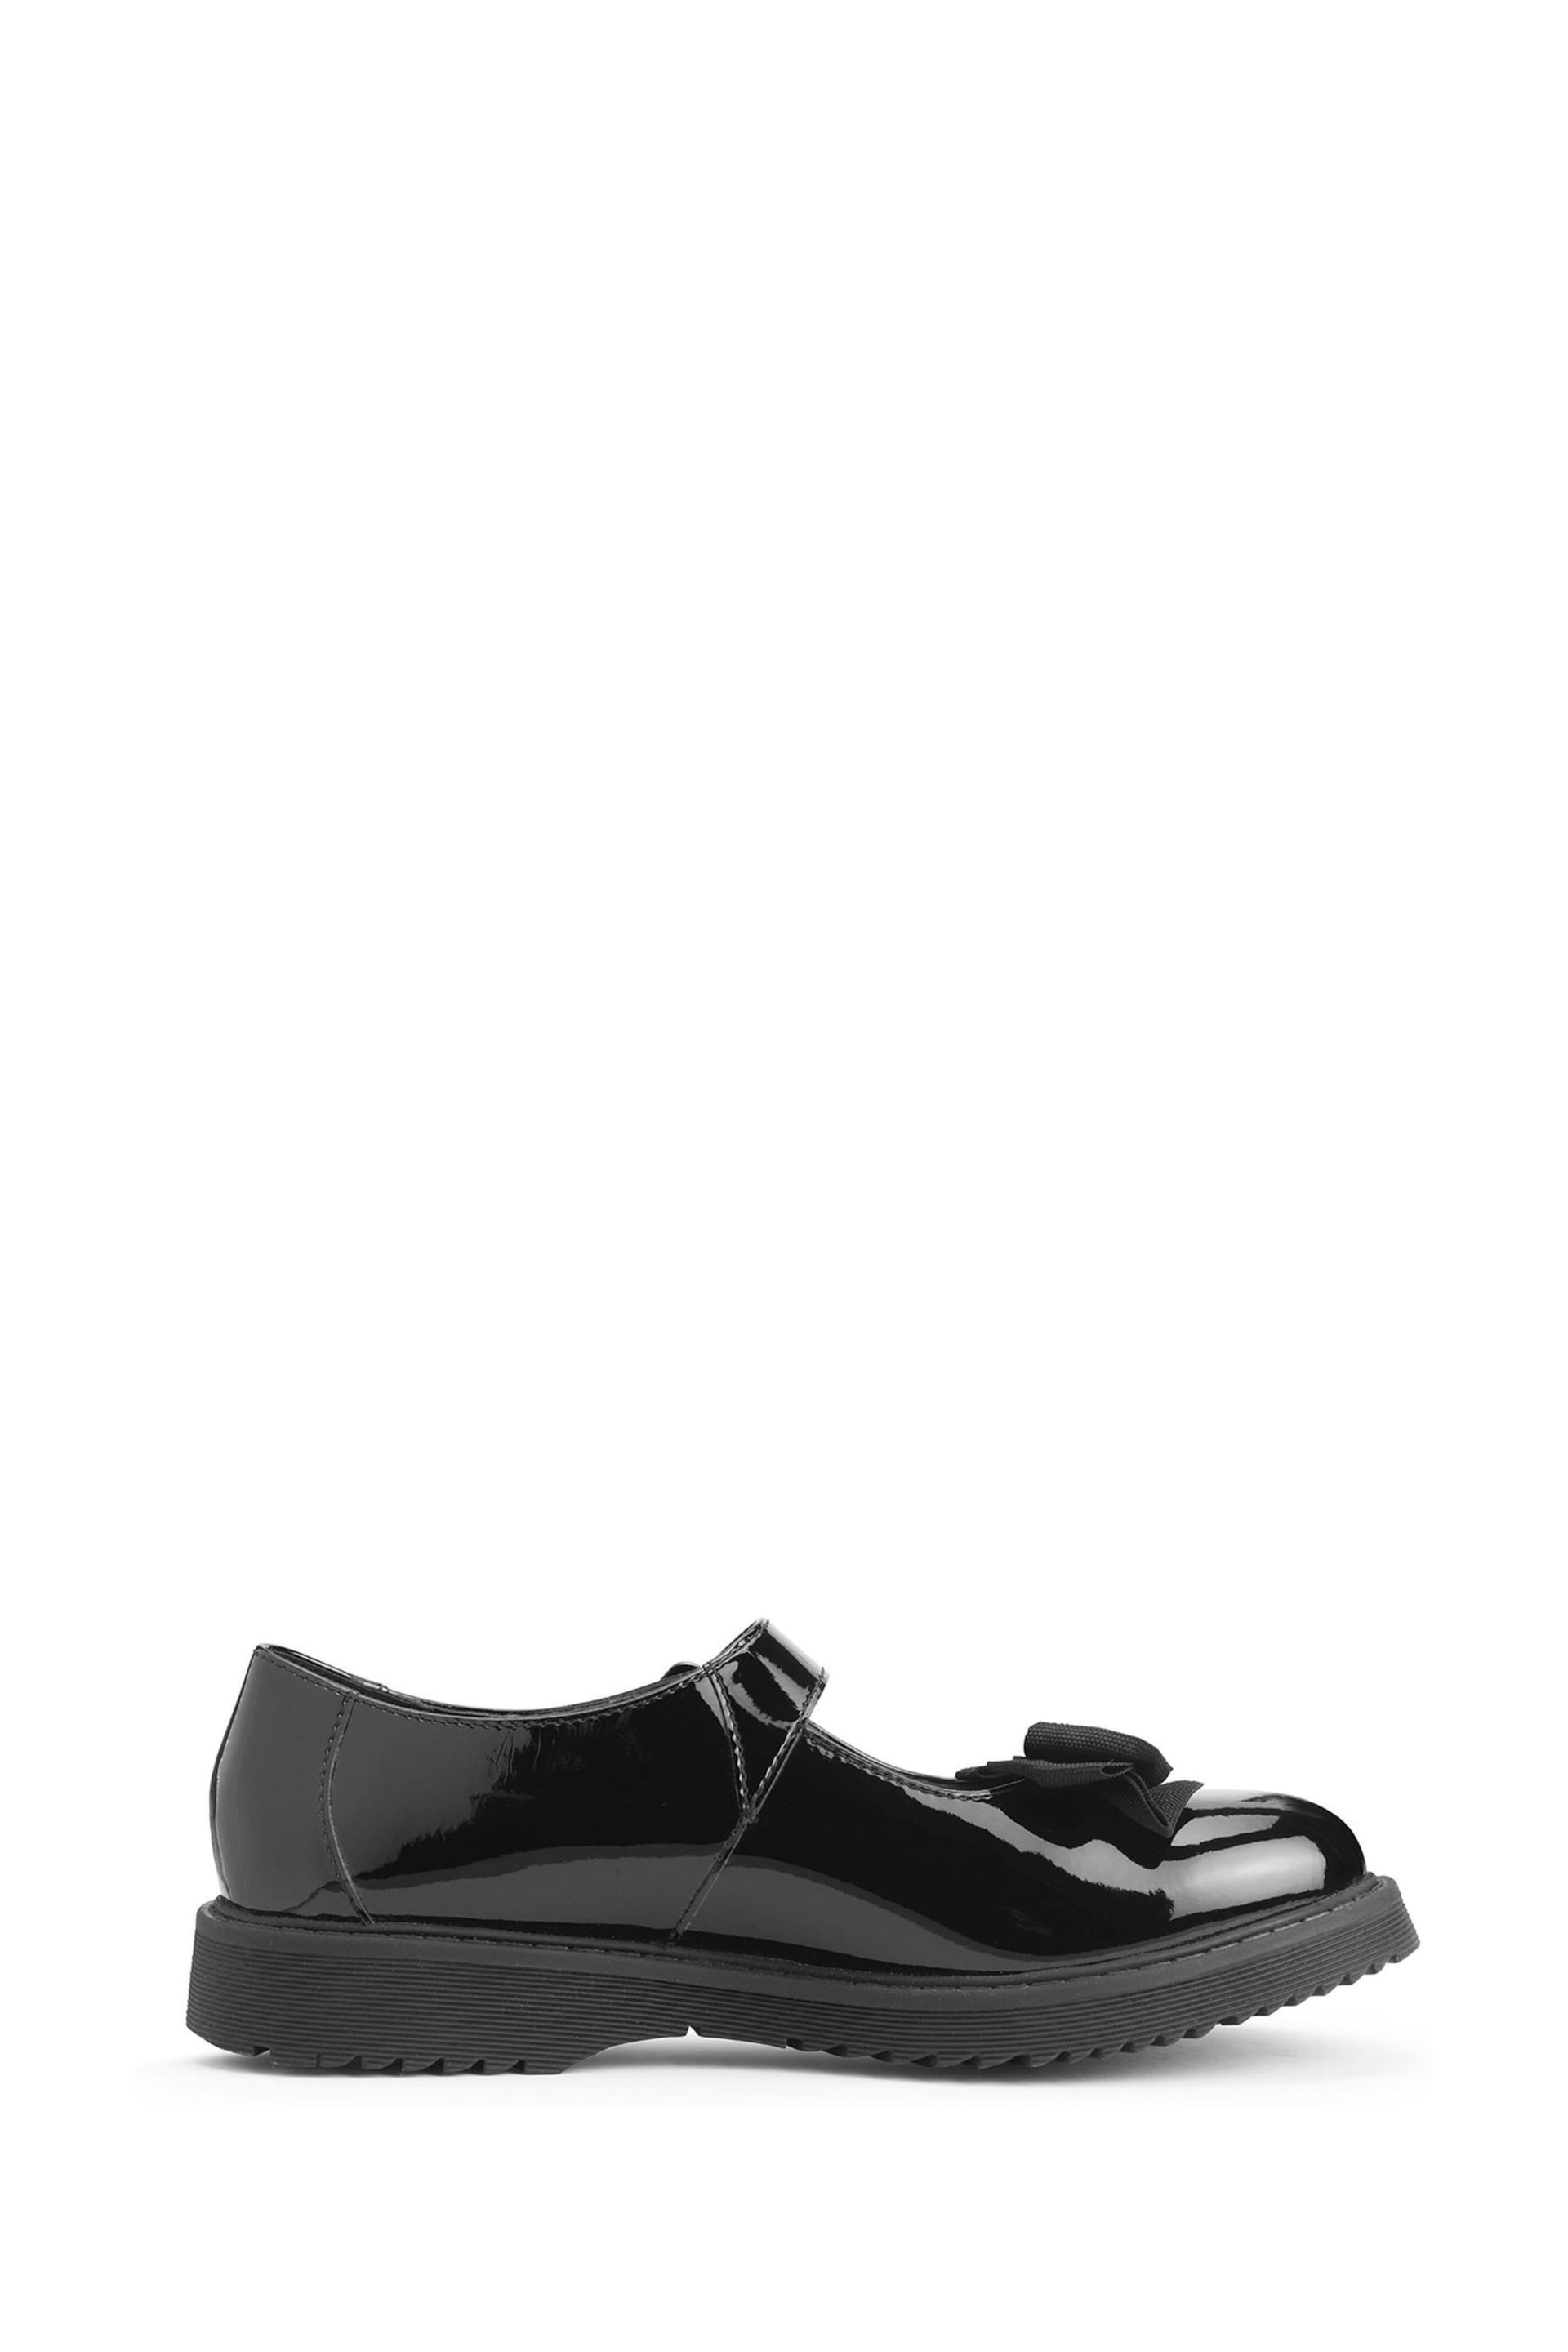 Start-Rite Empower Black Patent Chunky Sole Mary Jane School Shoes - Image 5 of 6